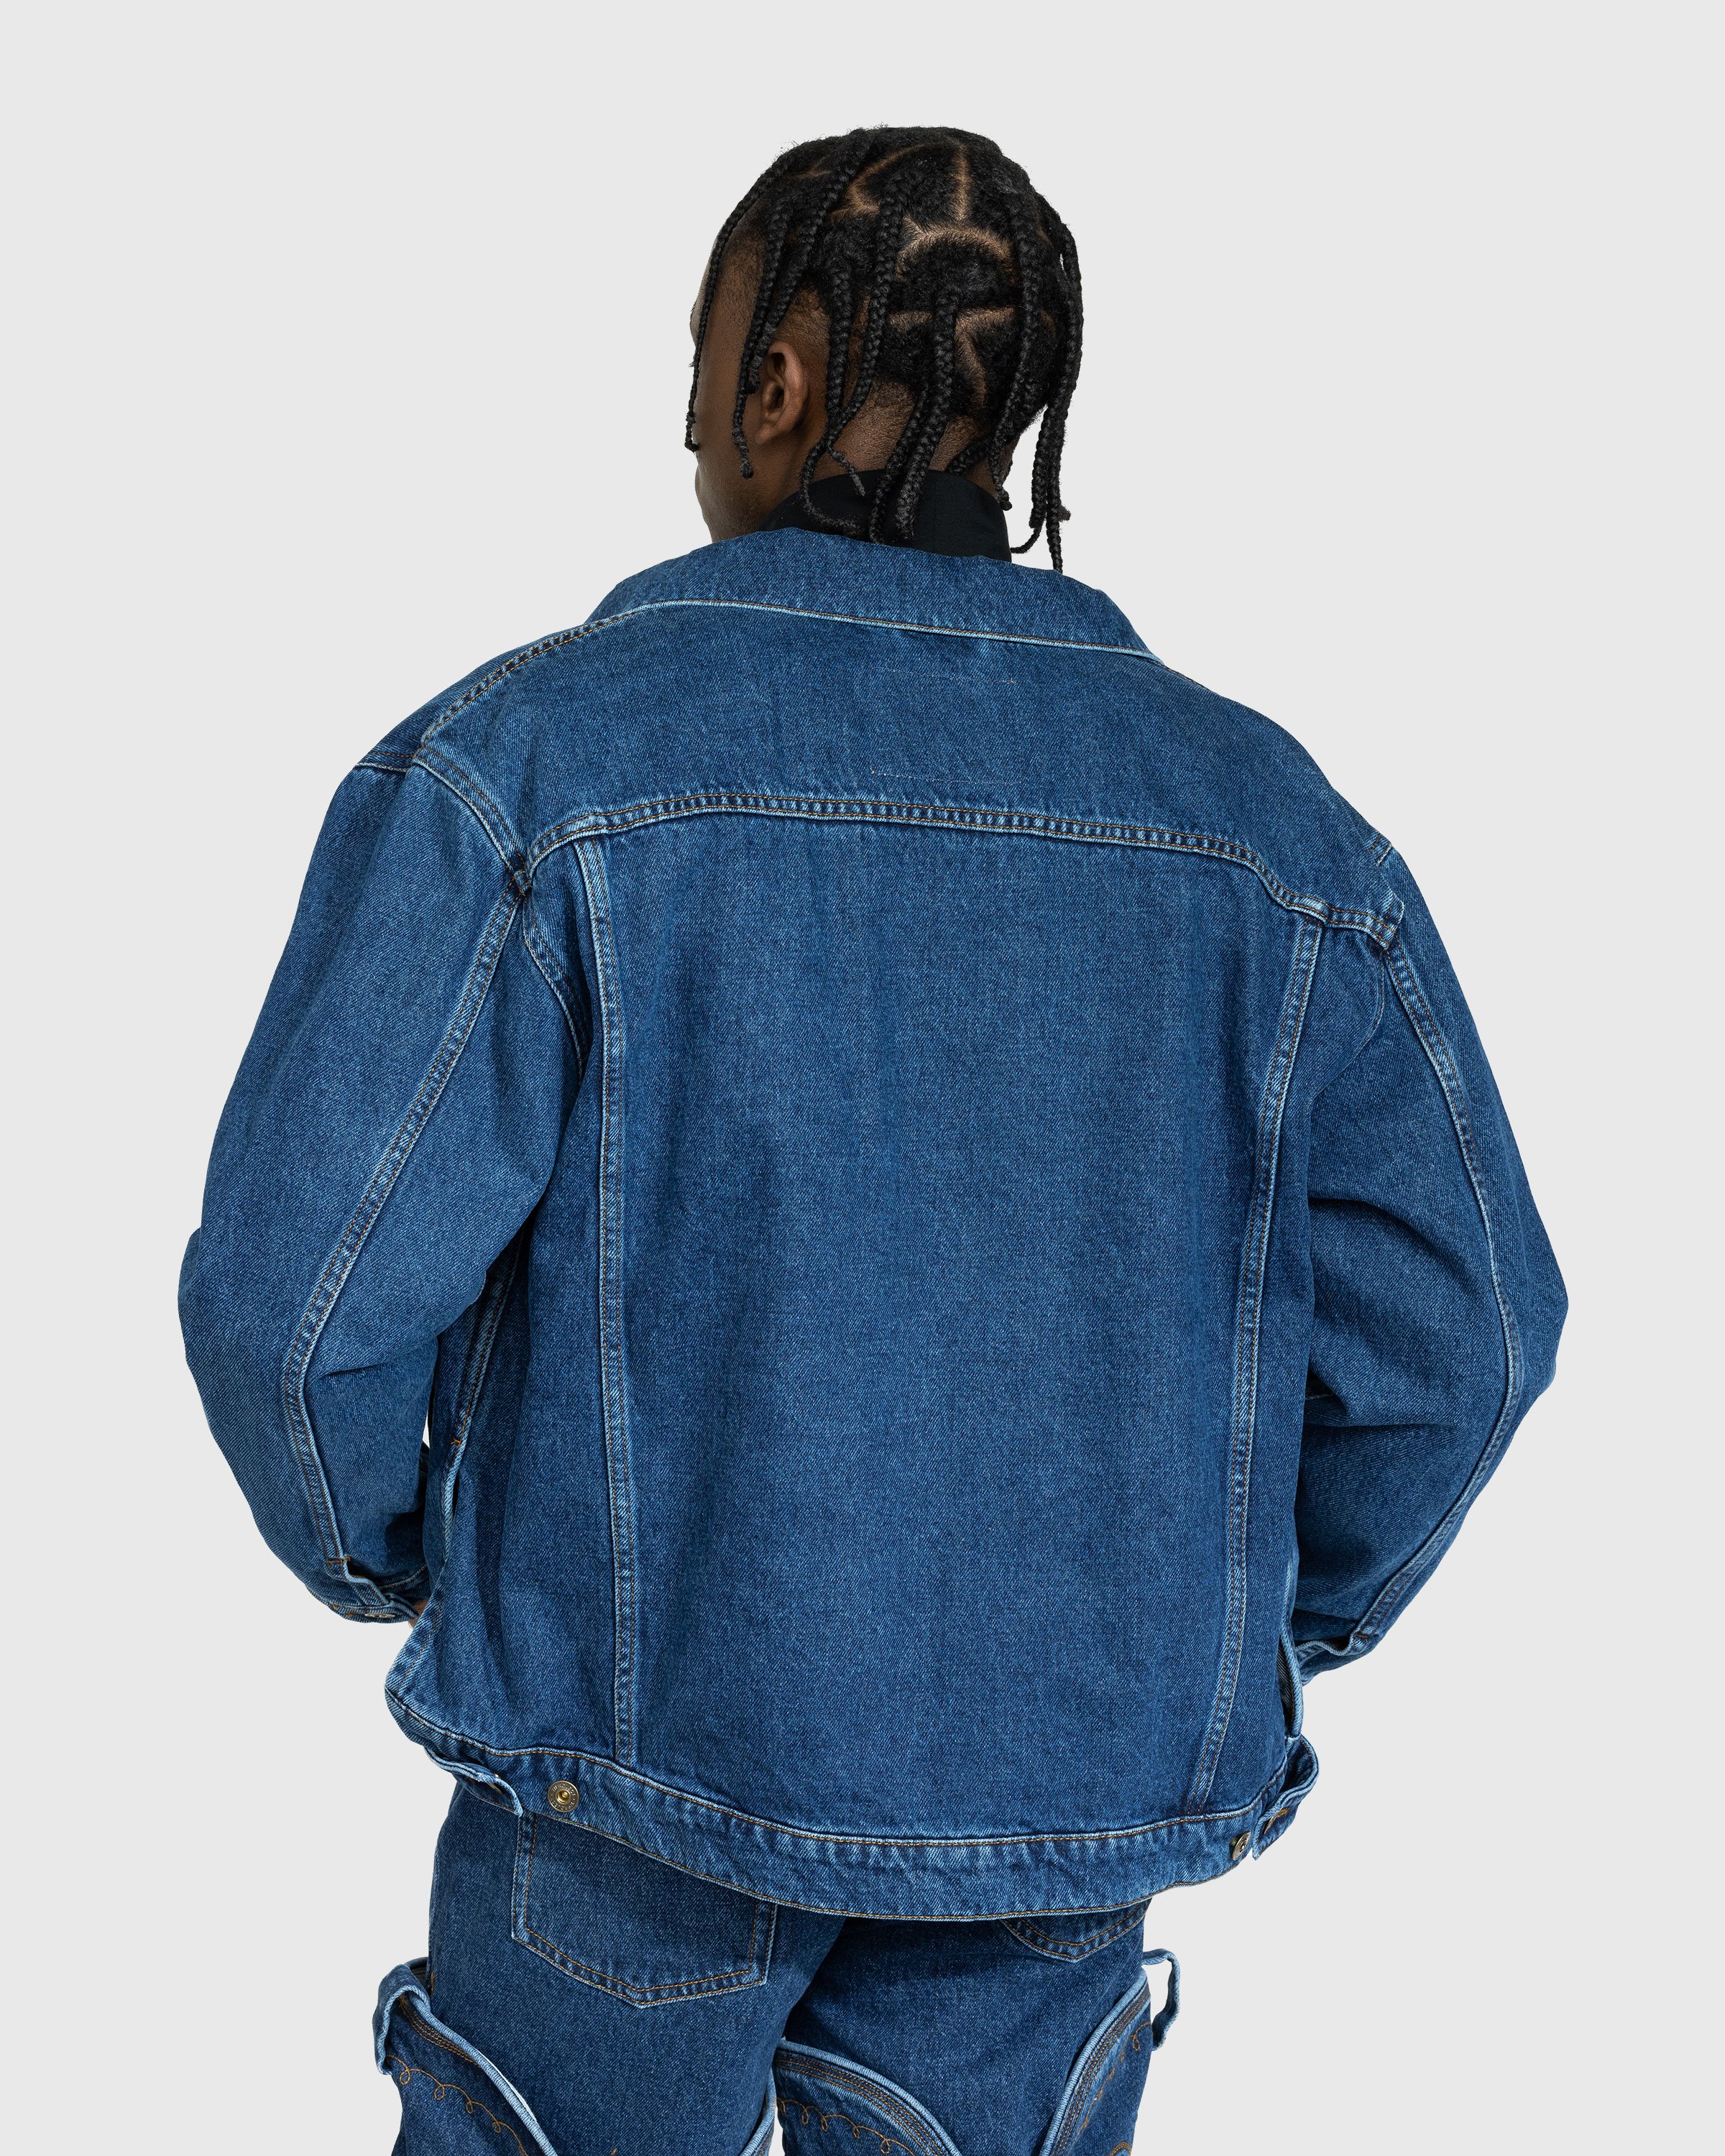 Y/Project - Classic Wire Denim Jacket Navy - Clothing - Blue - Image 3